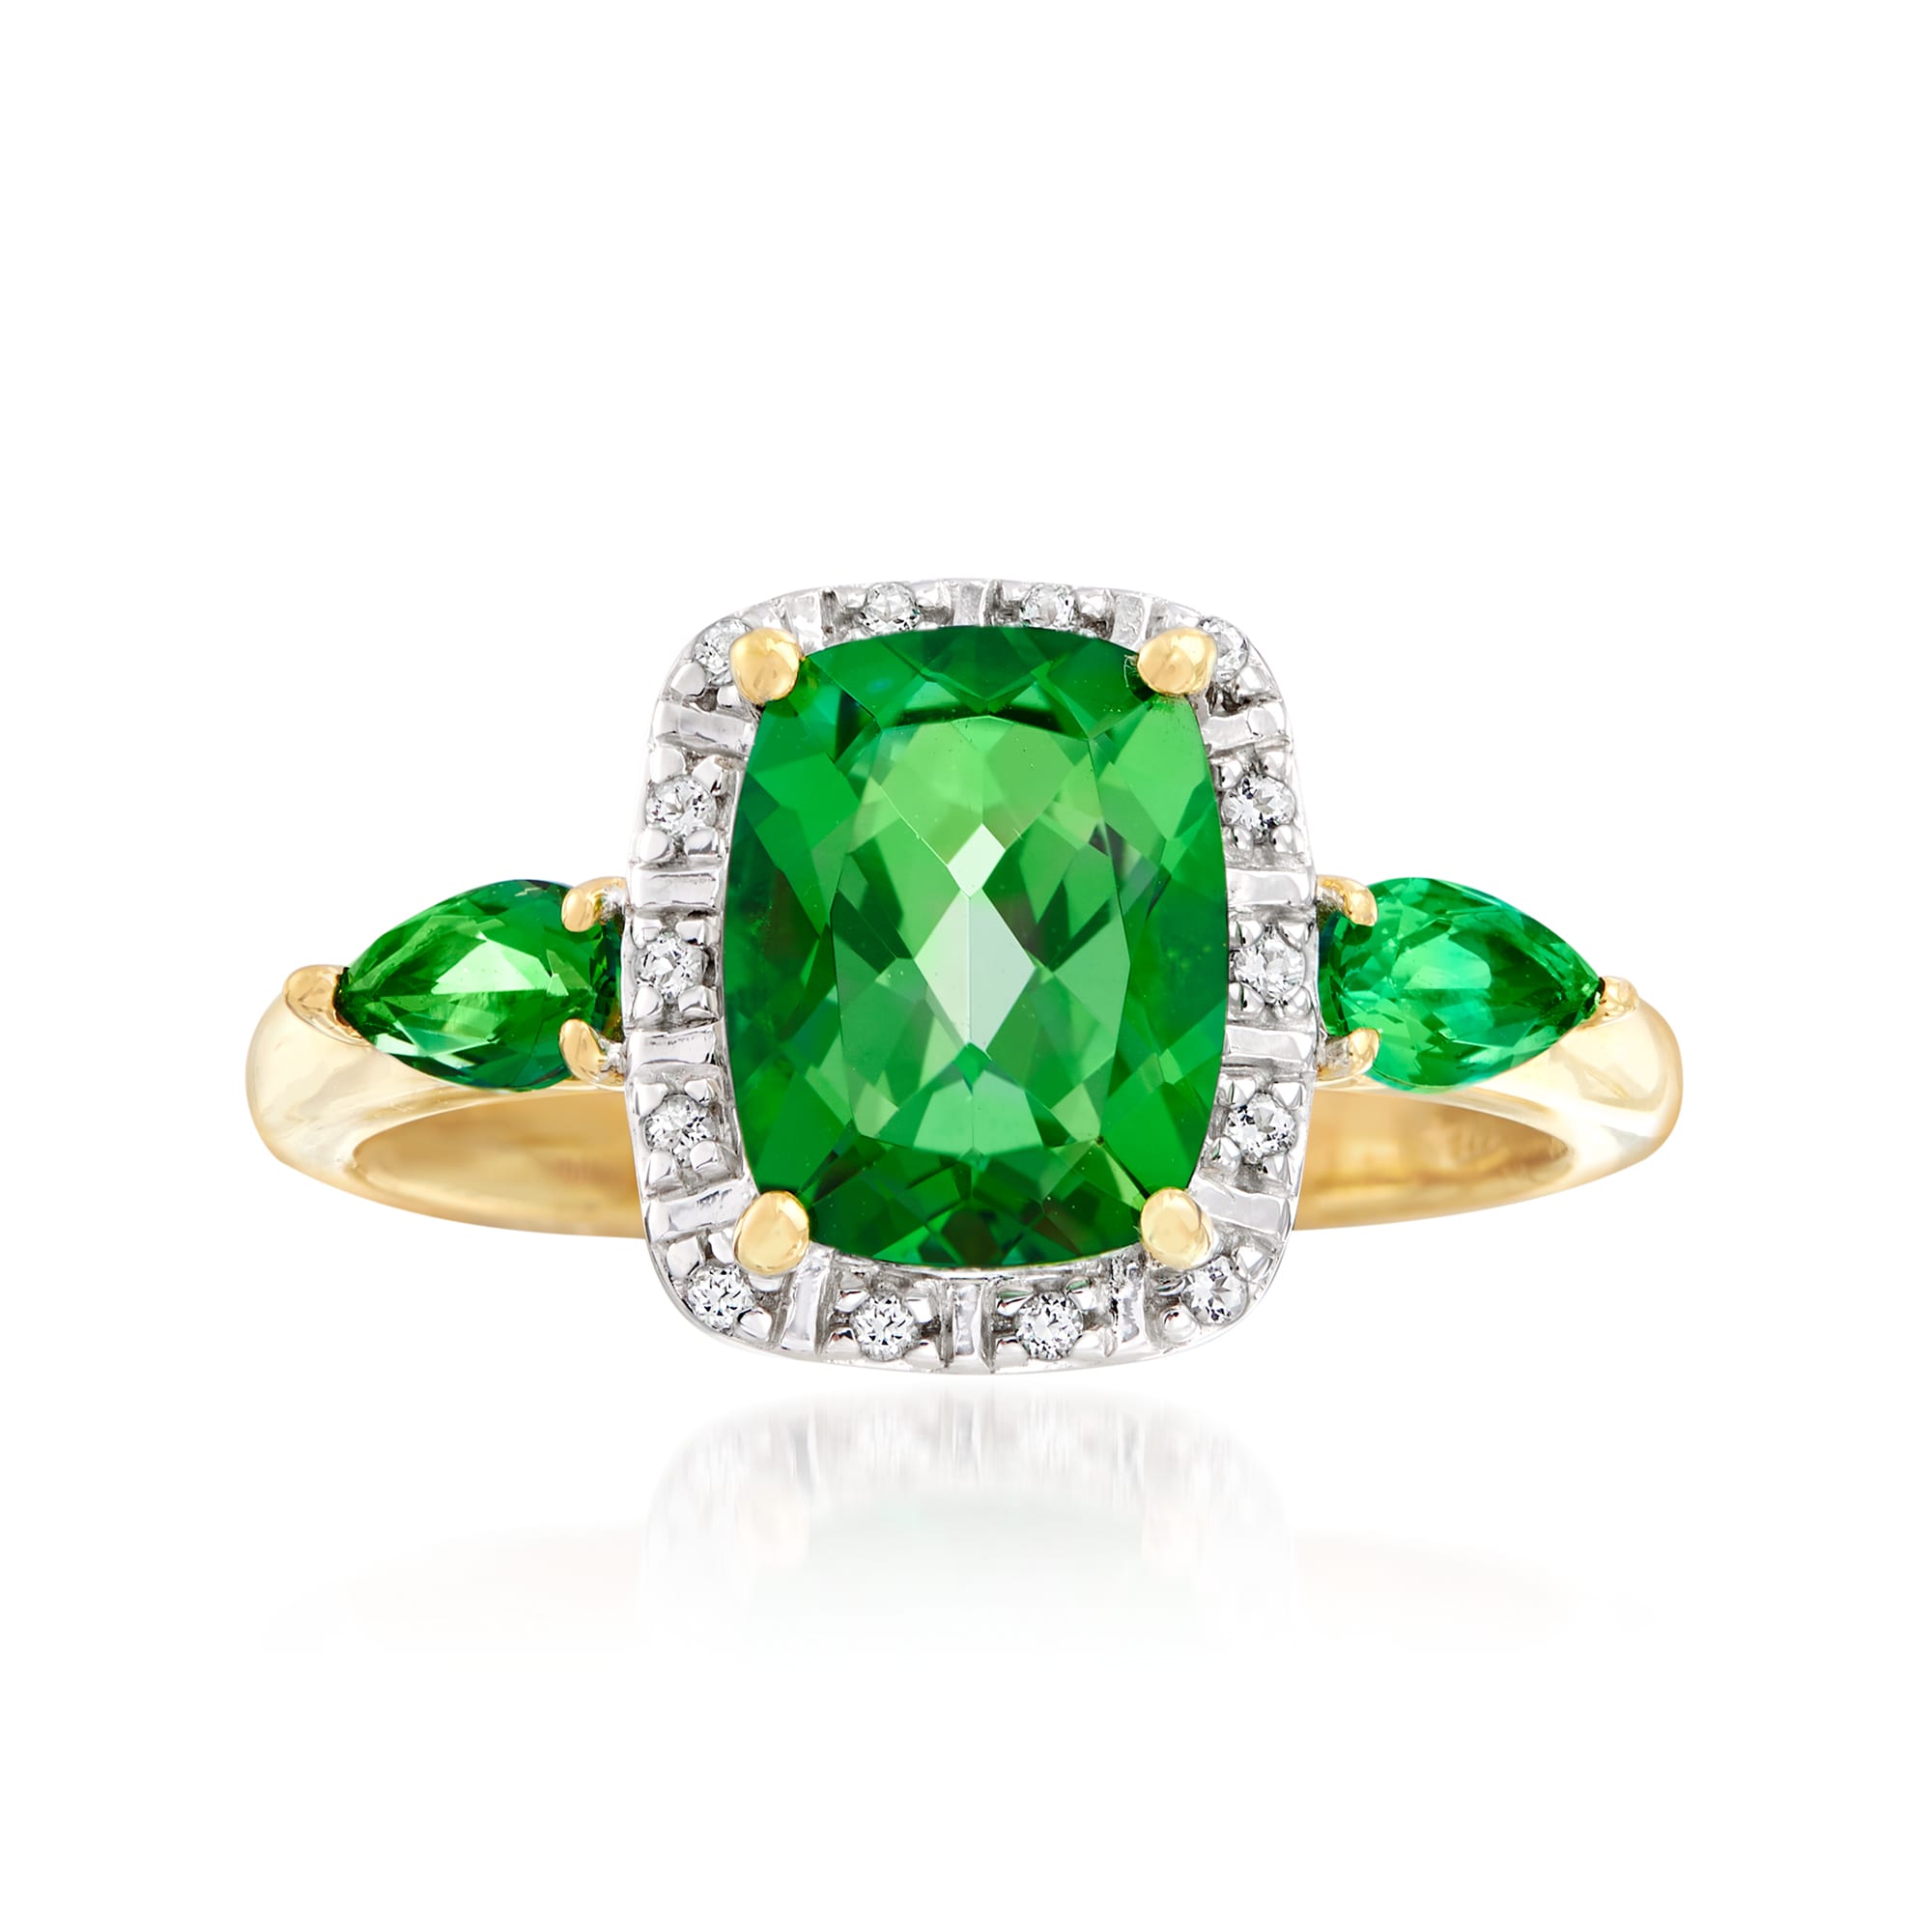 2.46 ct. t.w. Green and White Swarovski Topaz Ring in Sterling Silver ...